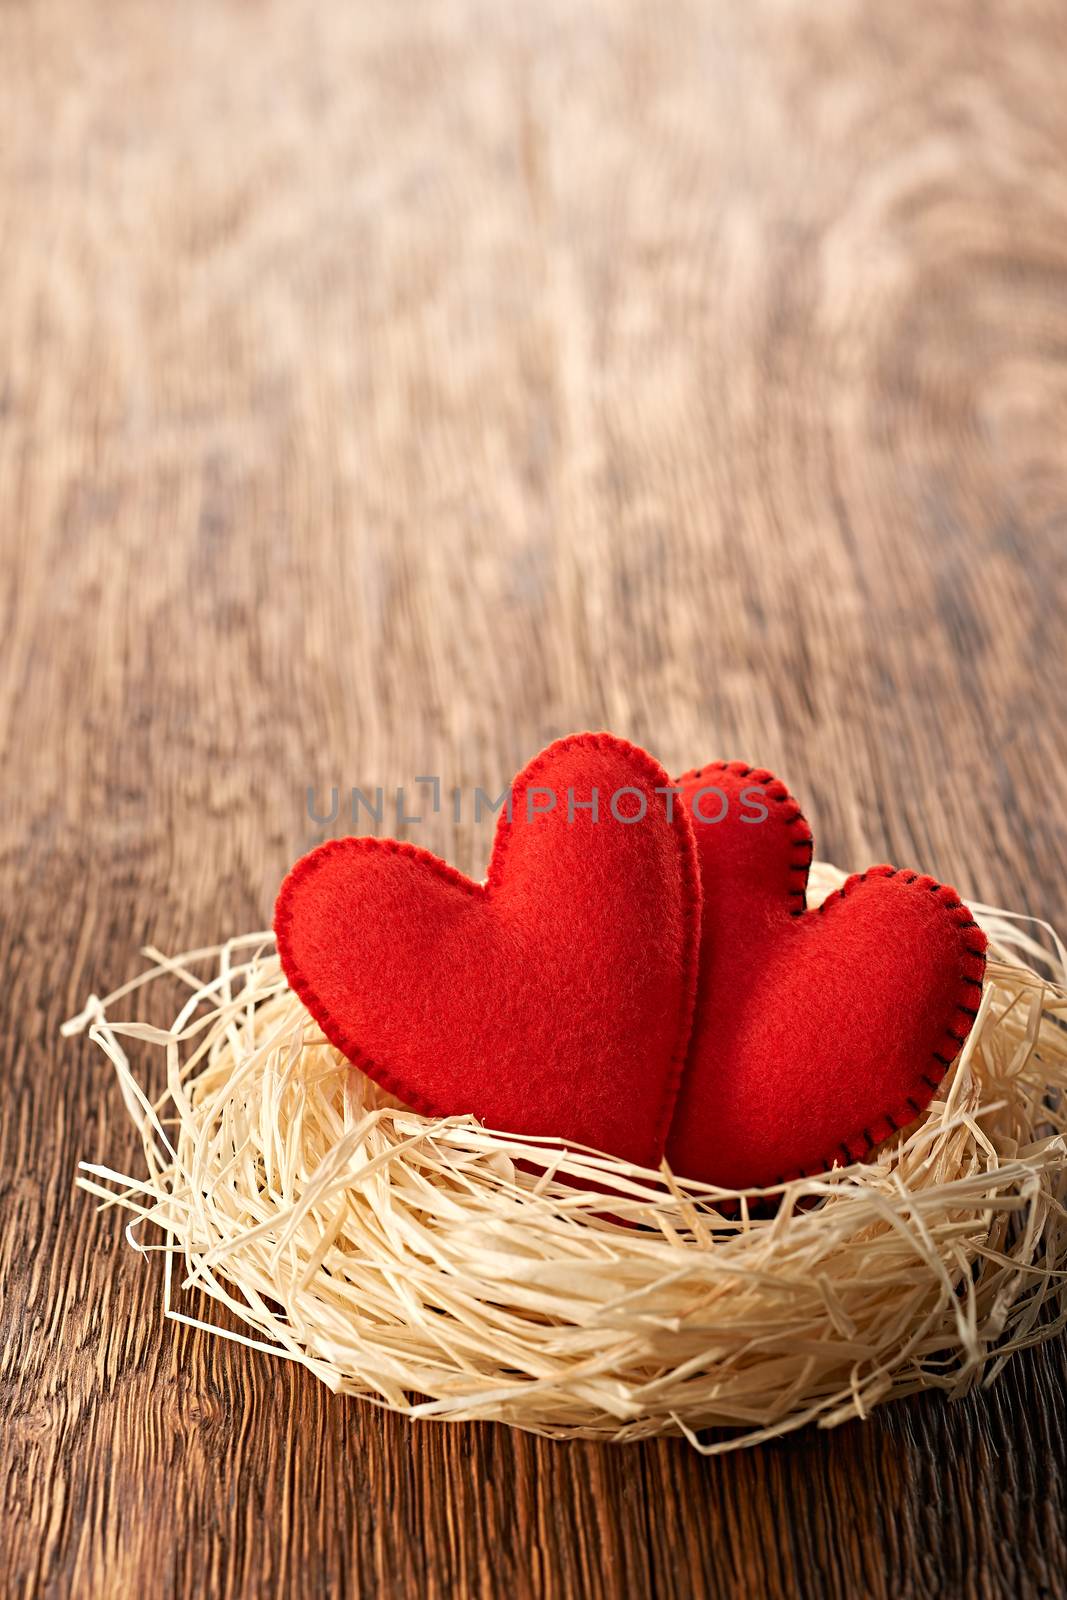 Love hearts, Valentines Day. Hearts handmade on wooden background. Couple made of red felt in straw nest. Vintage romantic style. Vivid greeting card, copyspace.  